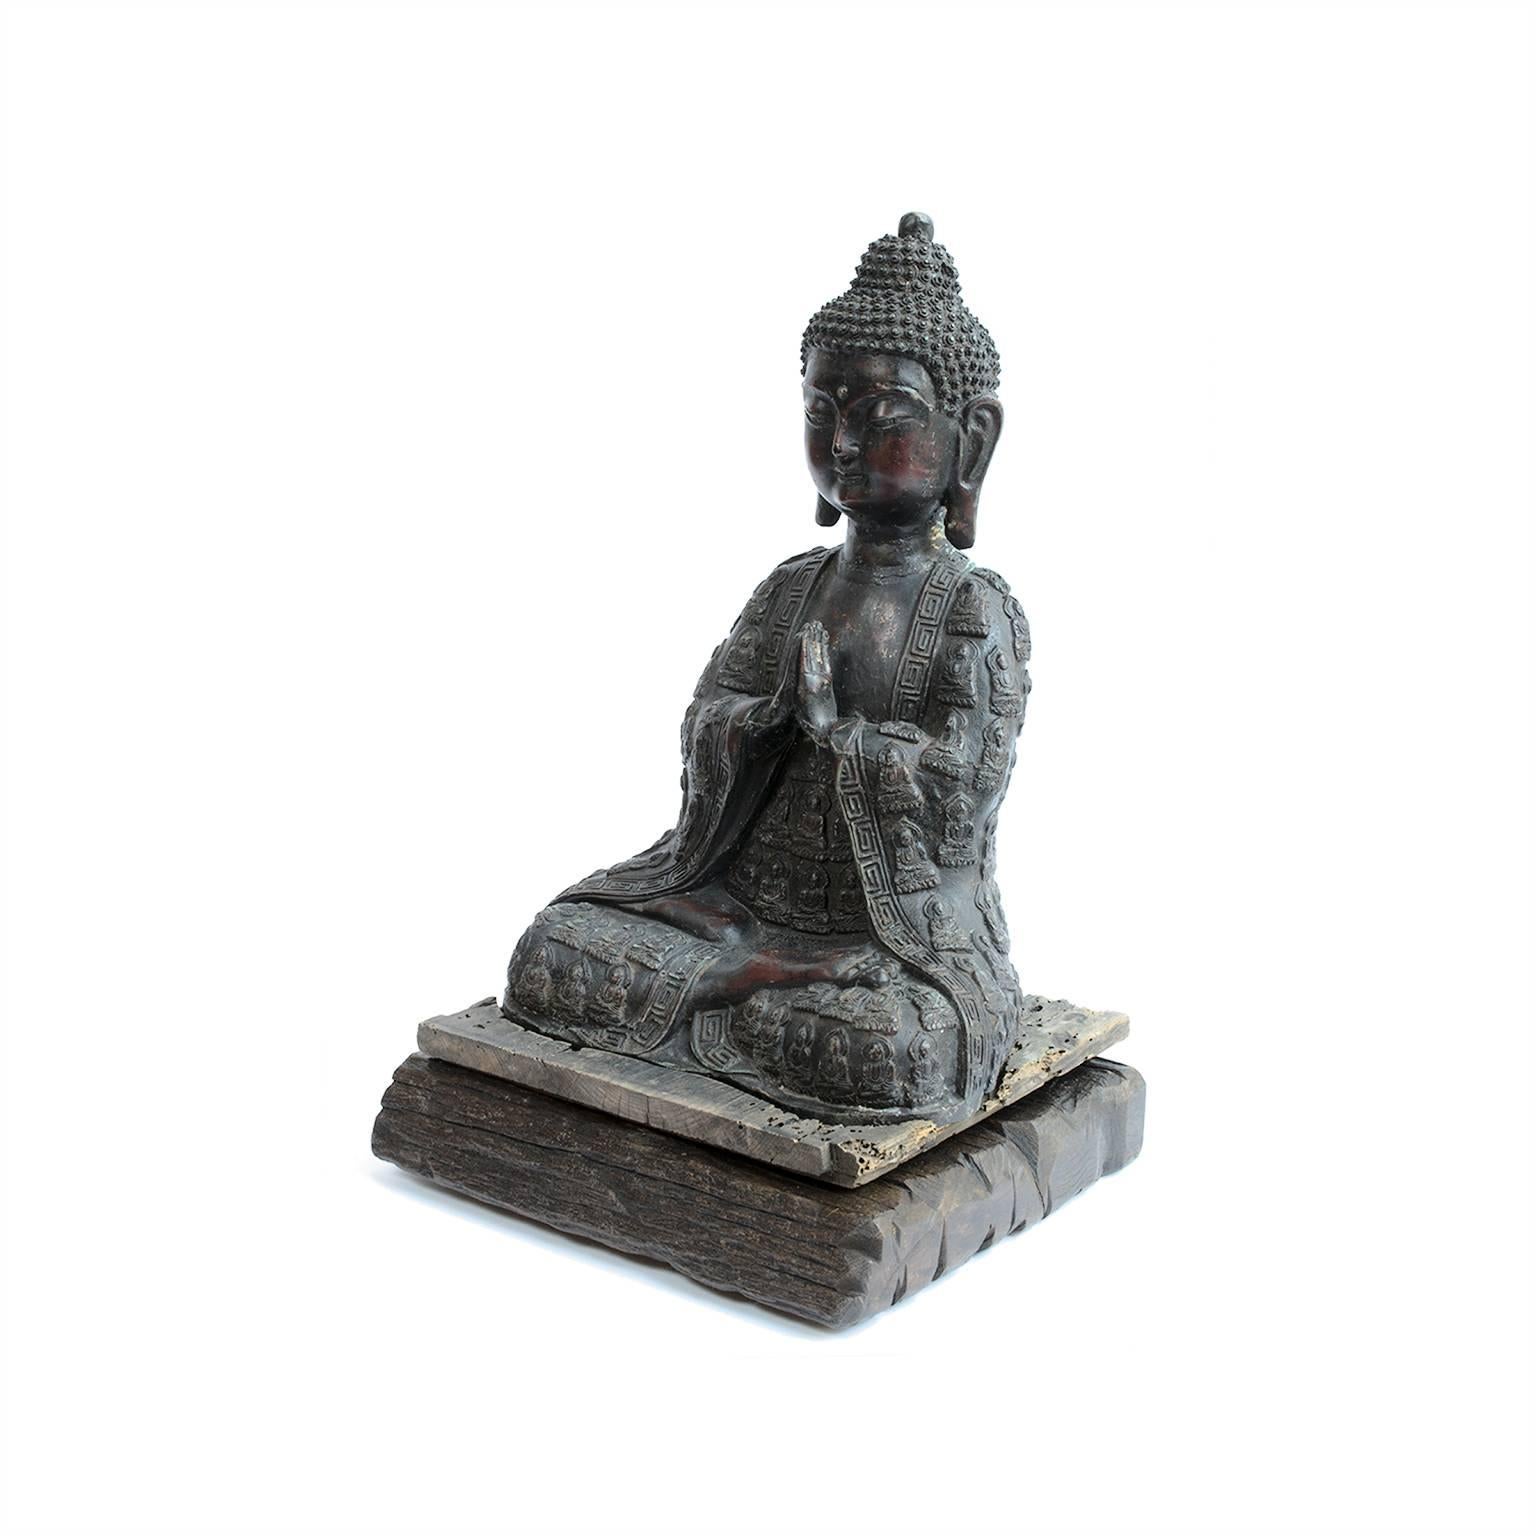 This finely wrought bronze figure, with robes unusually decorated in miniature meditation buddhas, represents the Siddhartha Gautama after he abandoned his life of luxury and the material world to reach enlightenment and become the Sakyamuni Buddha.